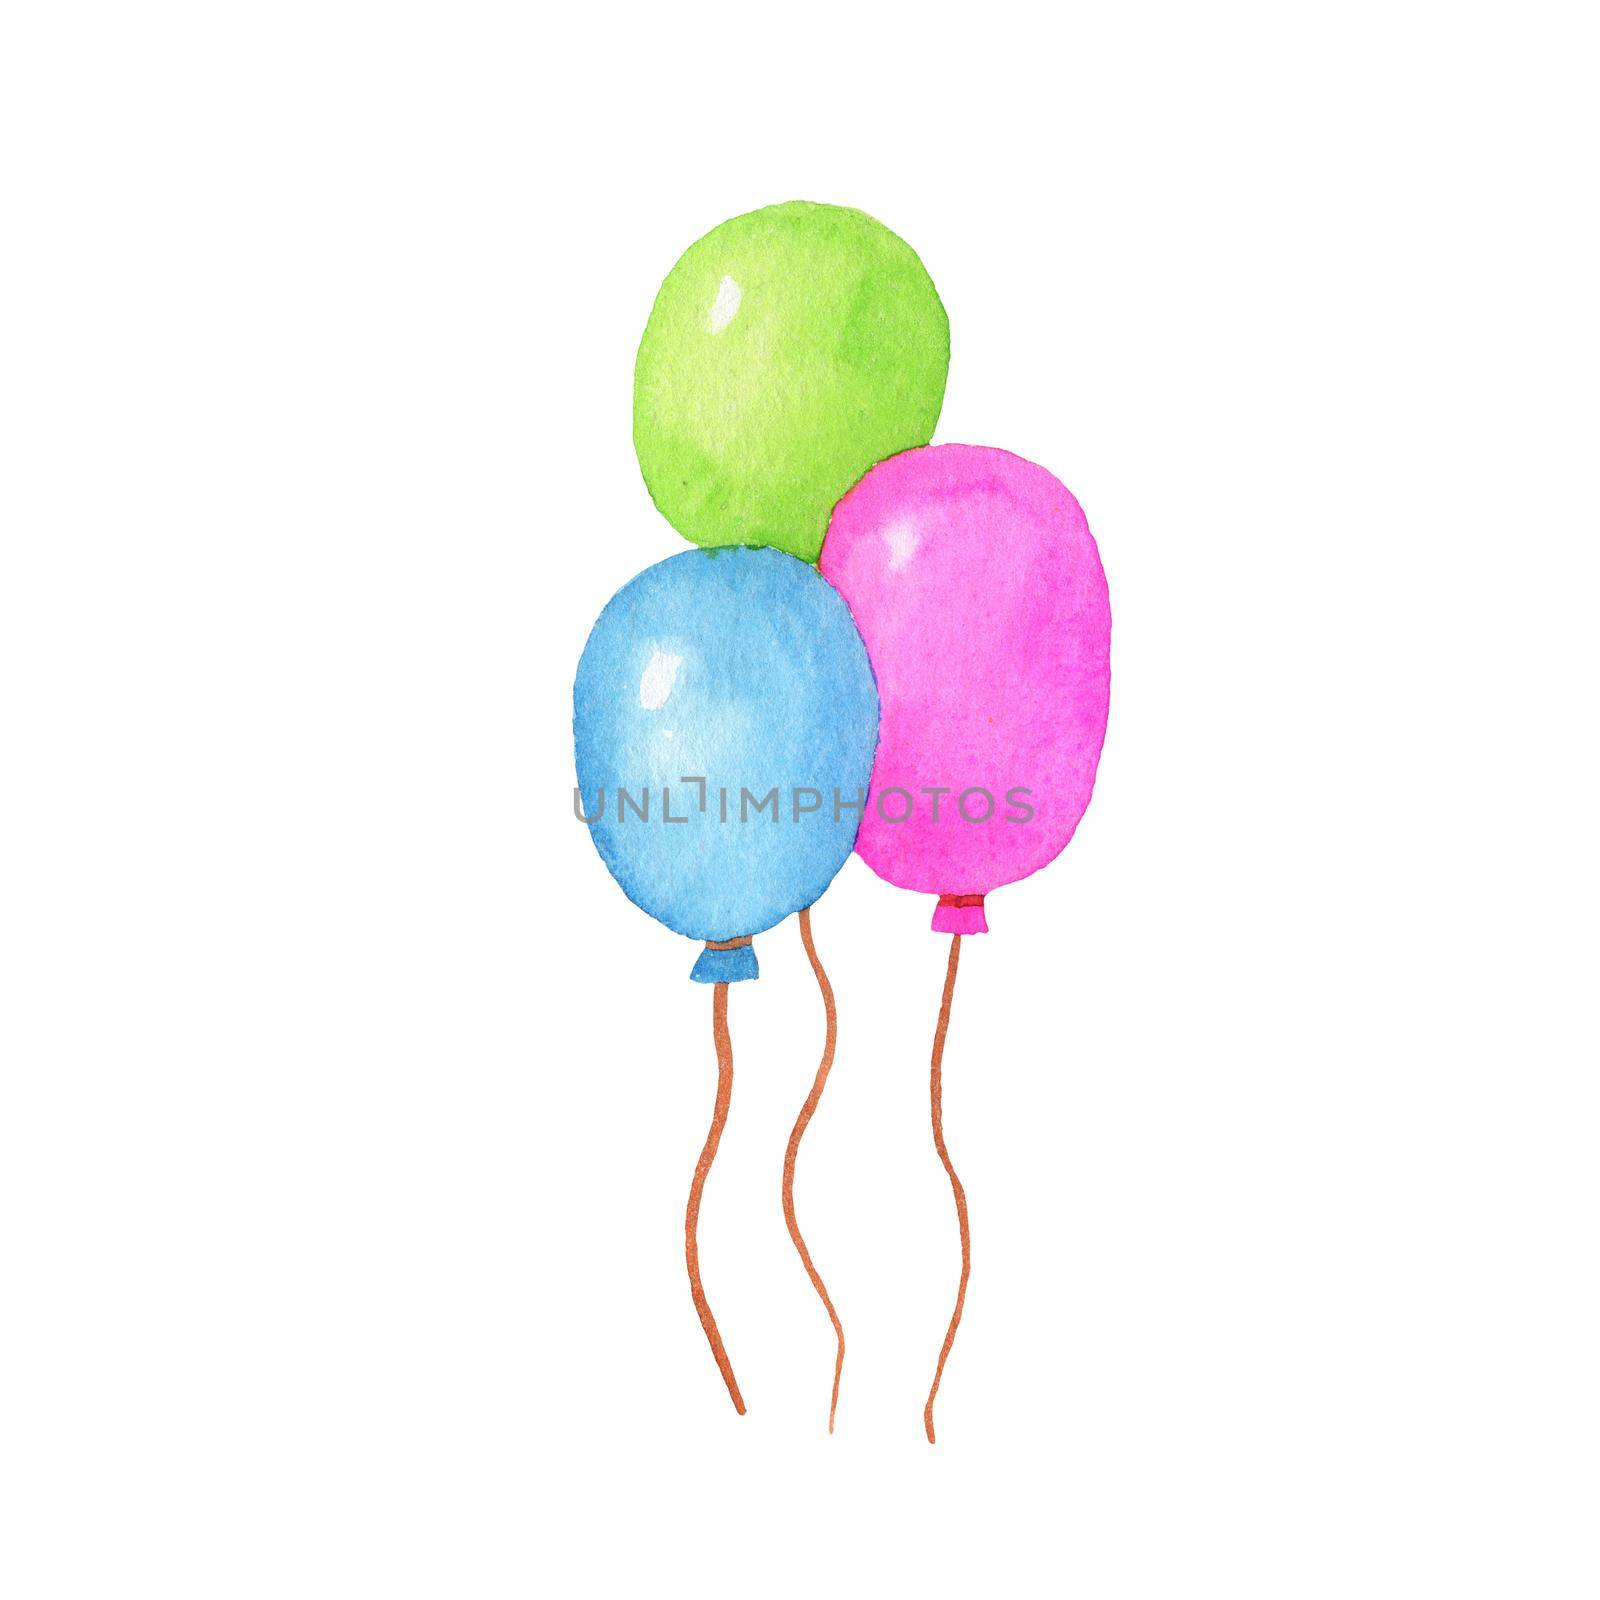 Colorful bunch of balloons. Watercolor hand drawn illustration isolated on white background by ElenaPlatova